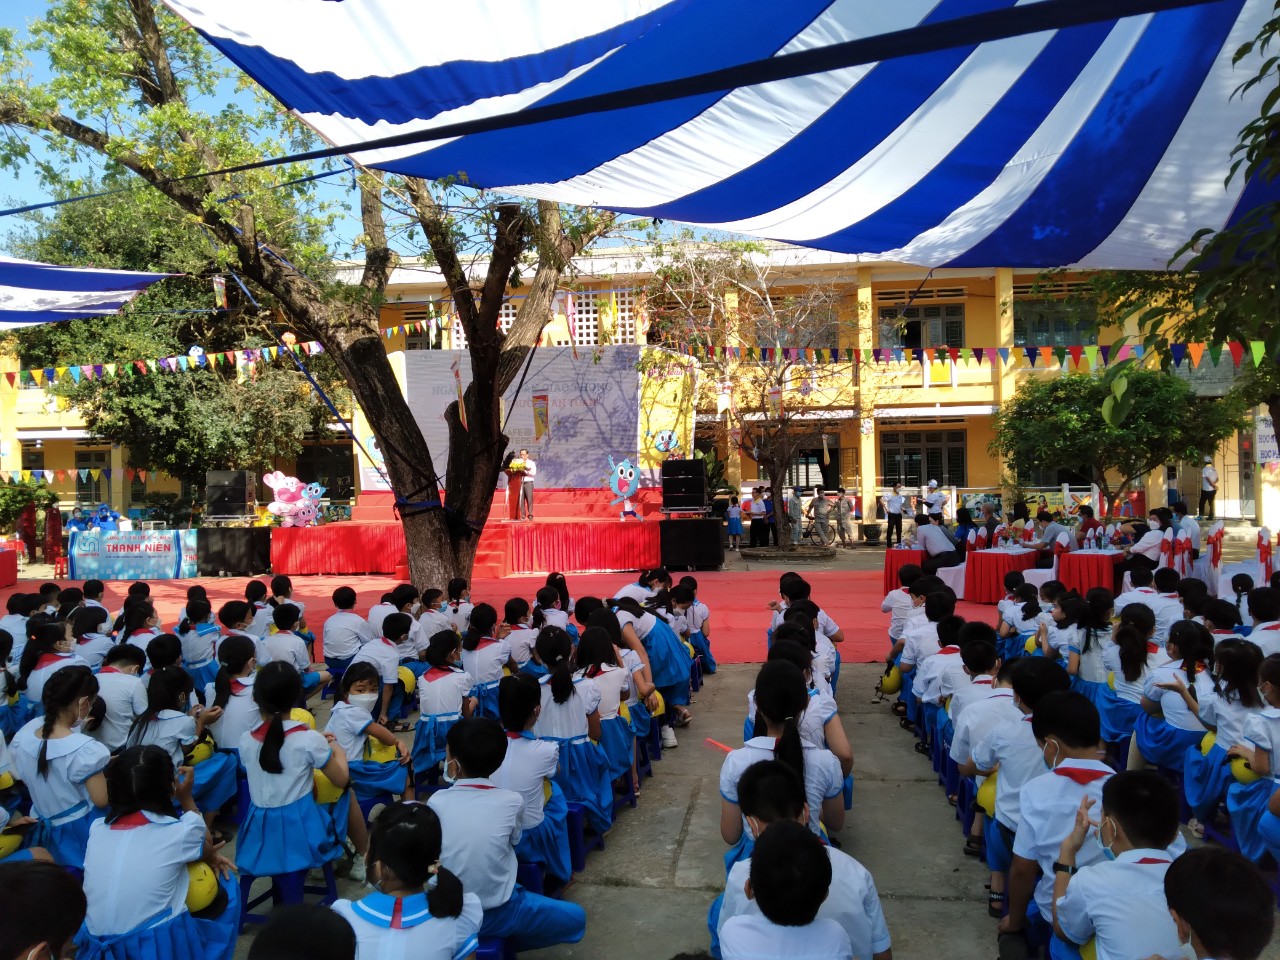 Traffic Safety Day in Quang Ngai province